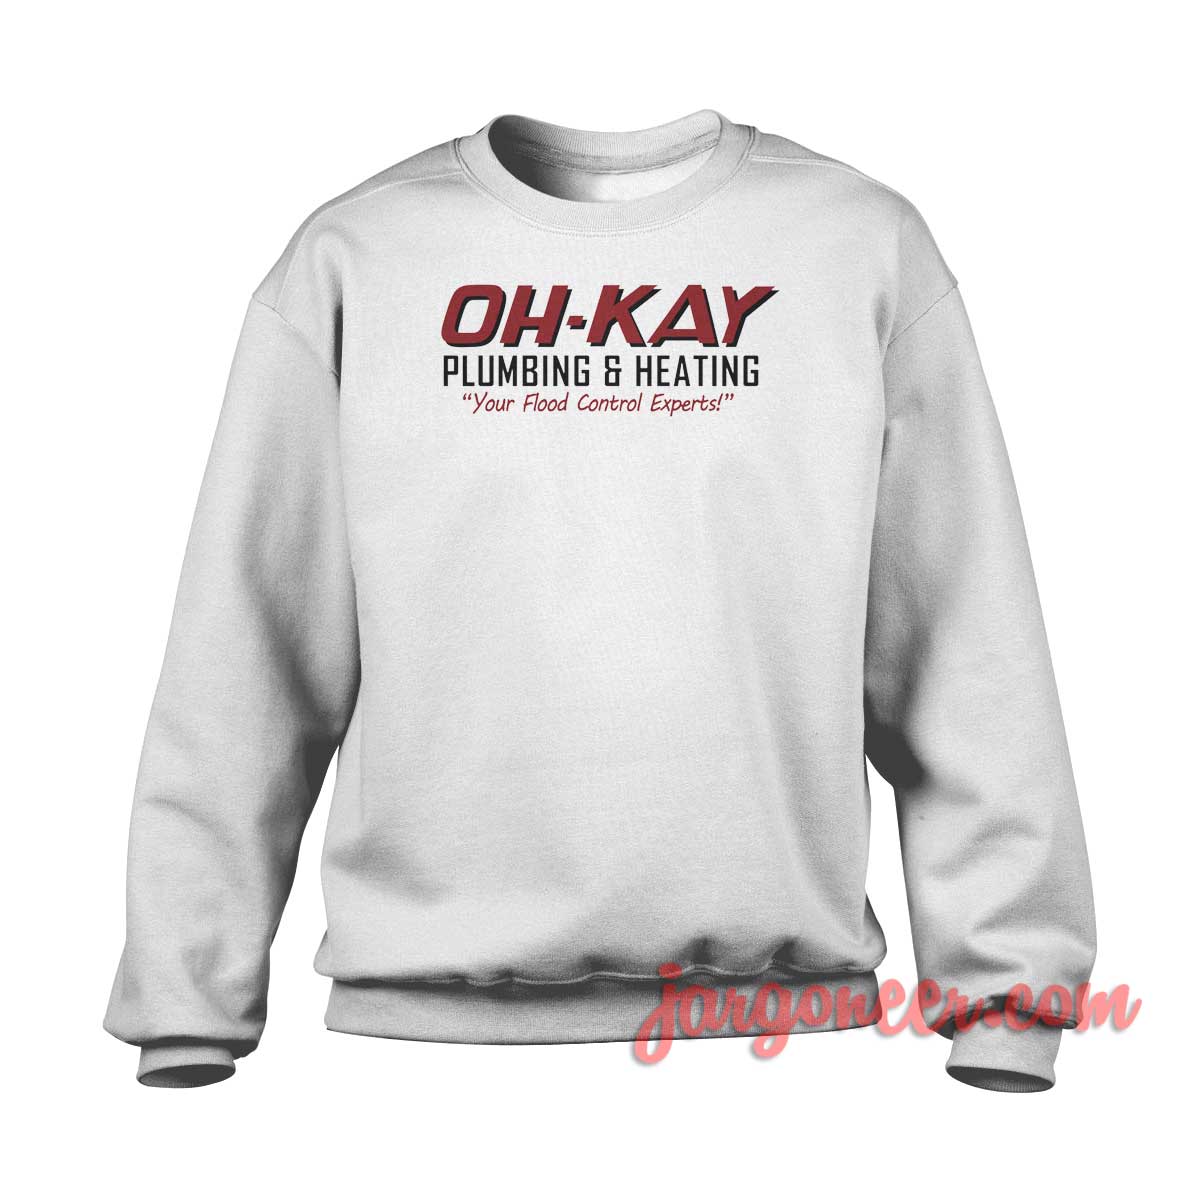 Oh Kay Plumbing And Heating 1 - Shop Unique Graphic Cool Shirt Designs